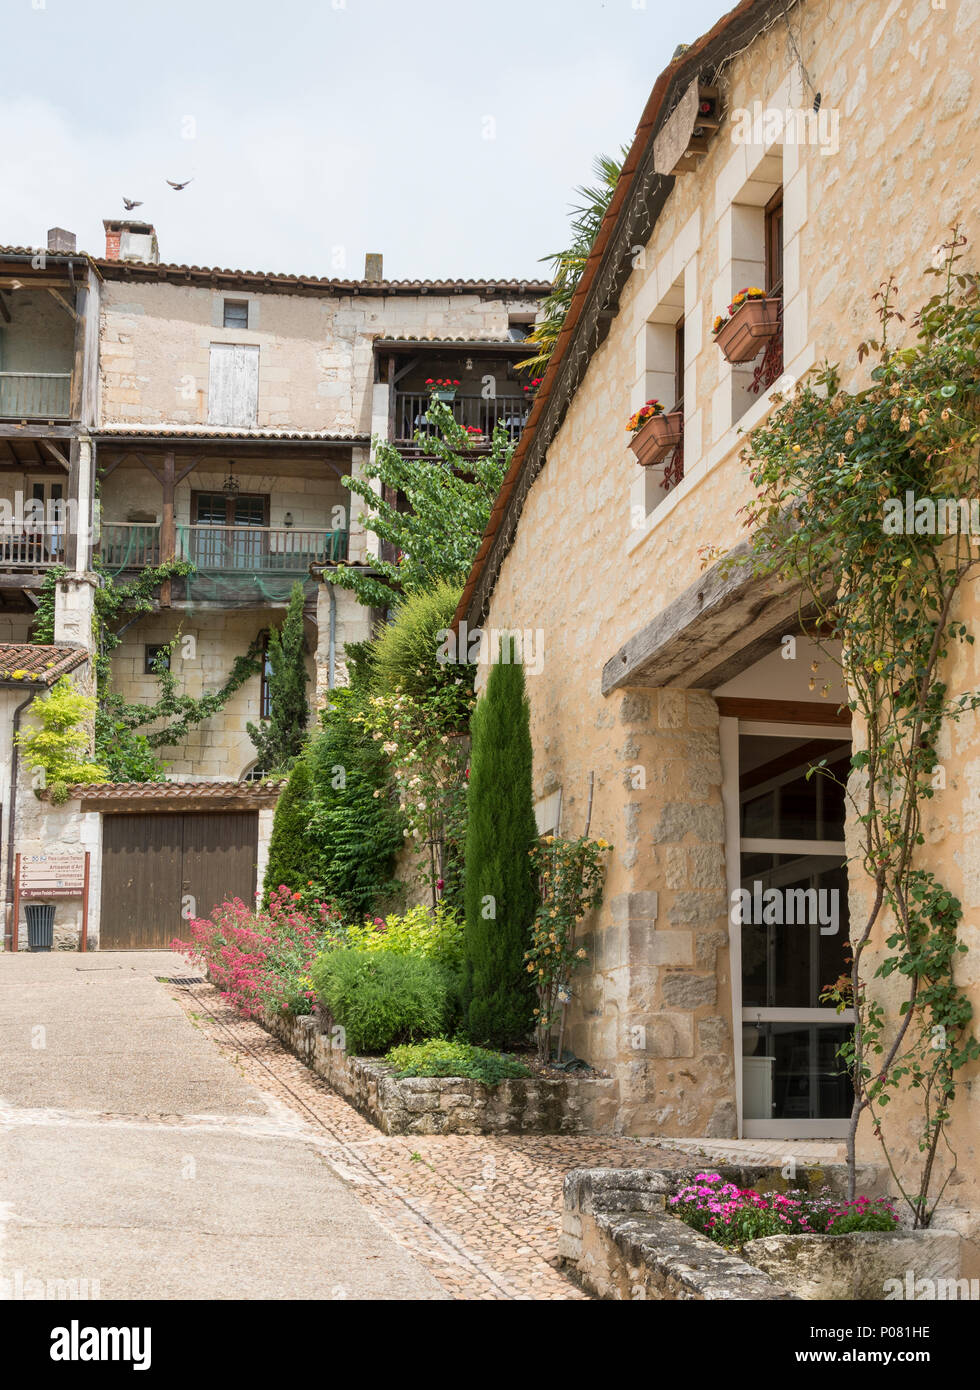 Aubeterre-sur-Dronne, listed as one of the most beautiful villages in France. Stock Photo